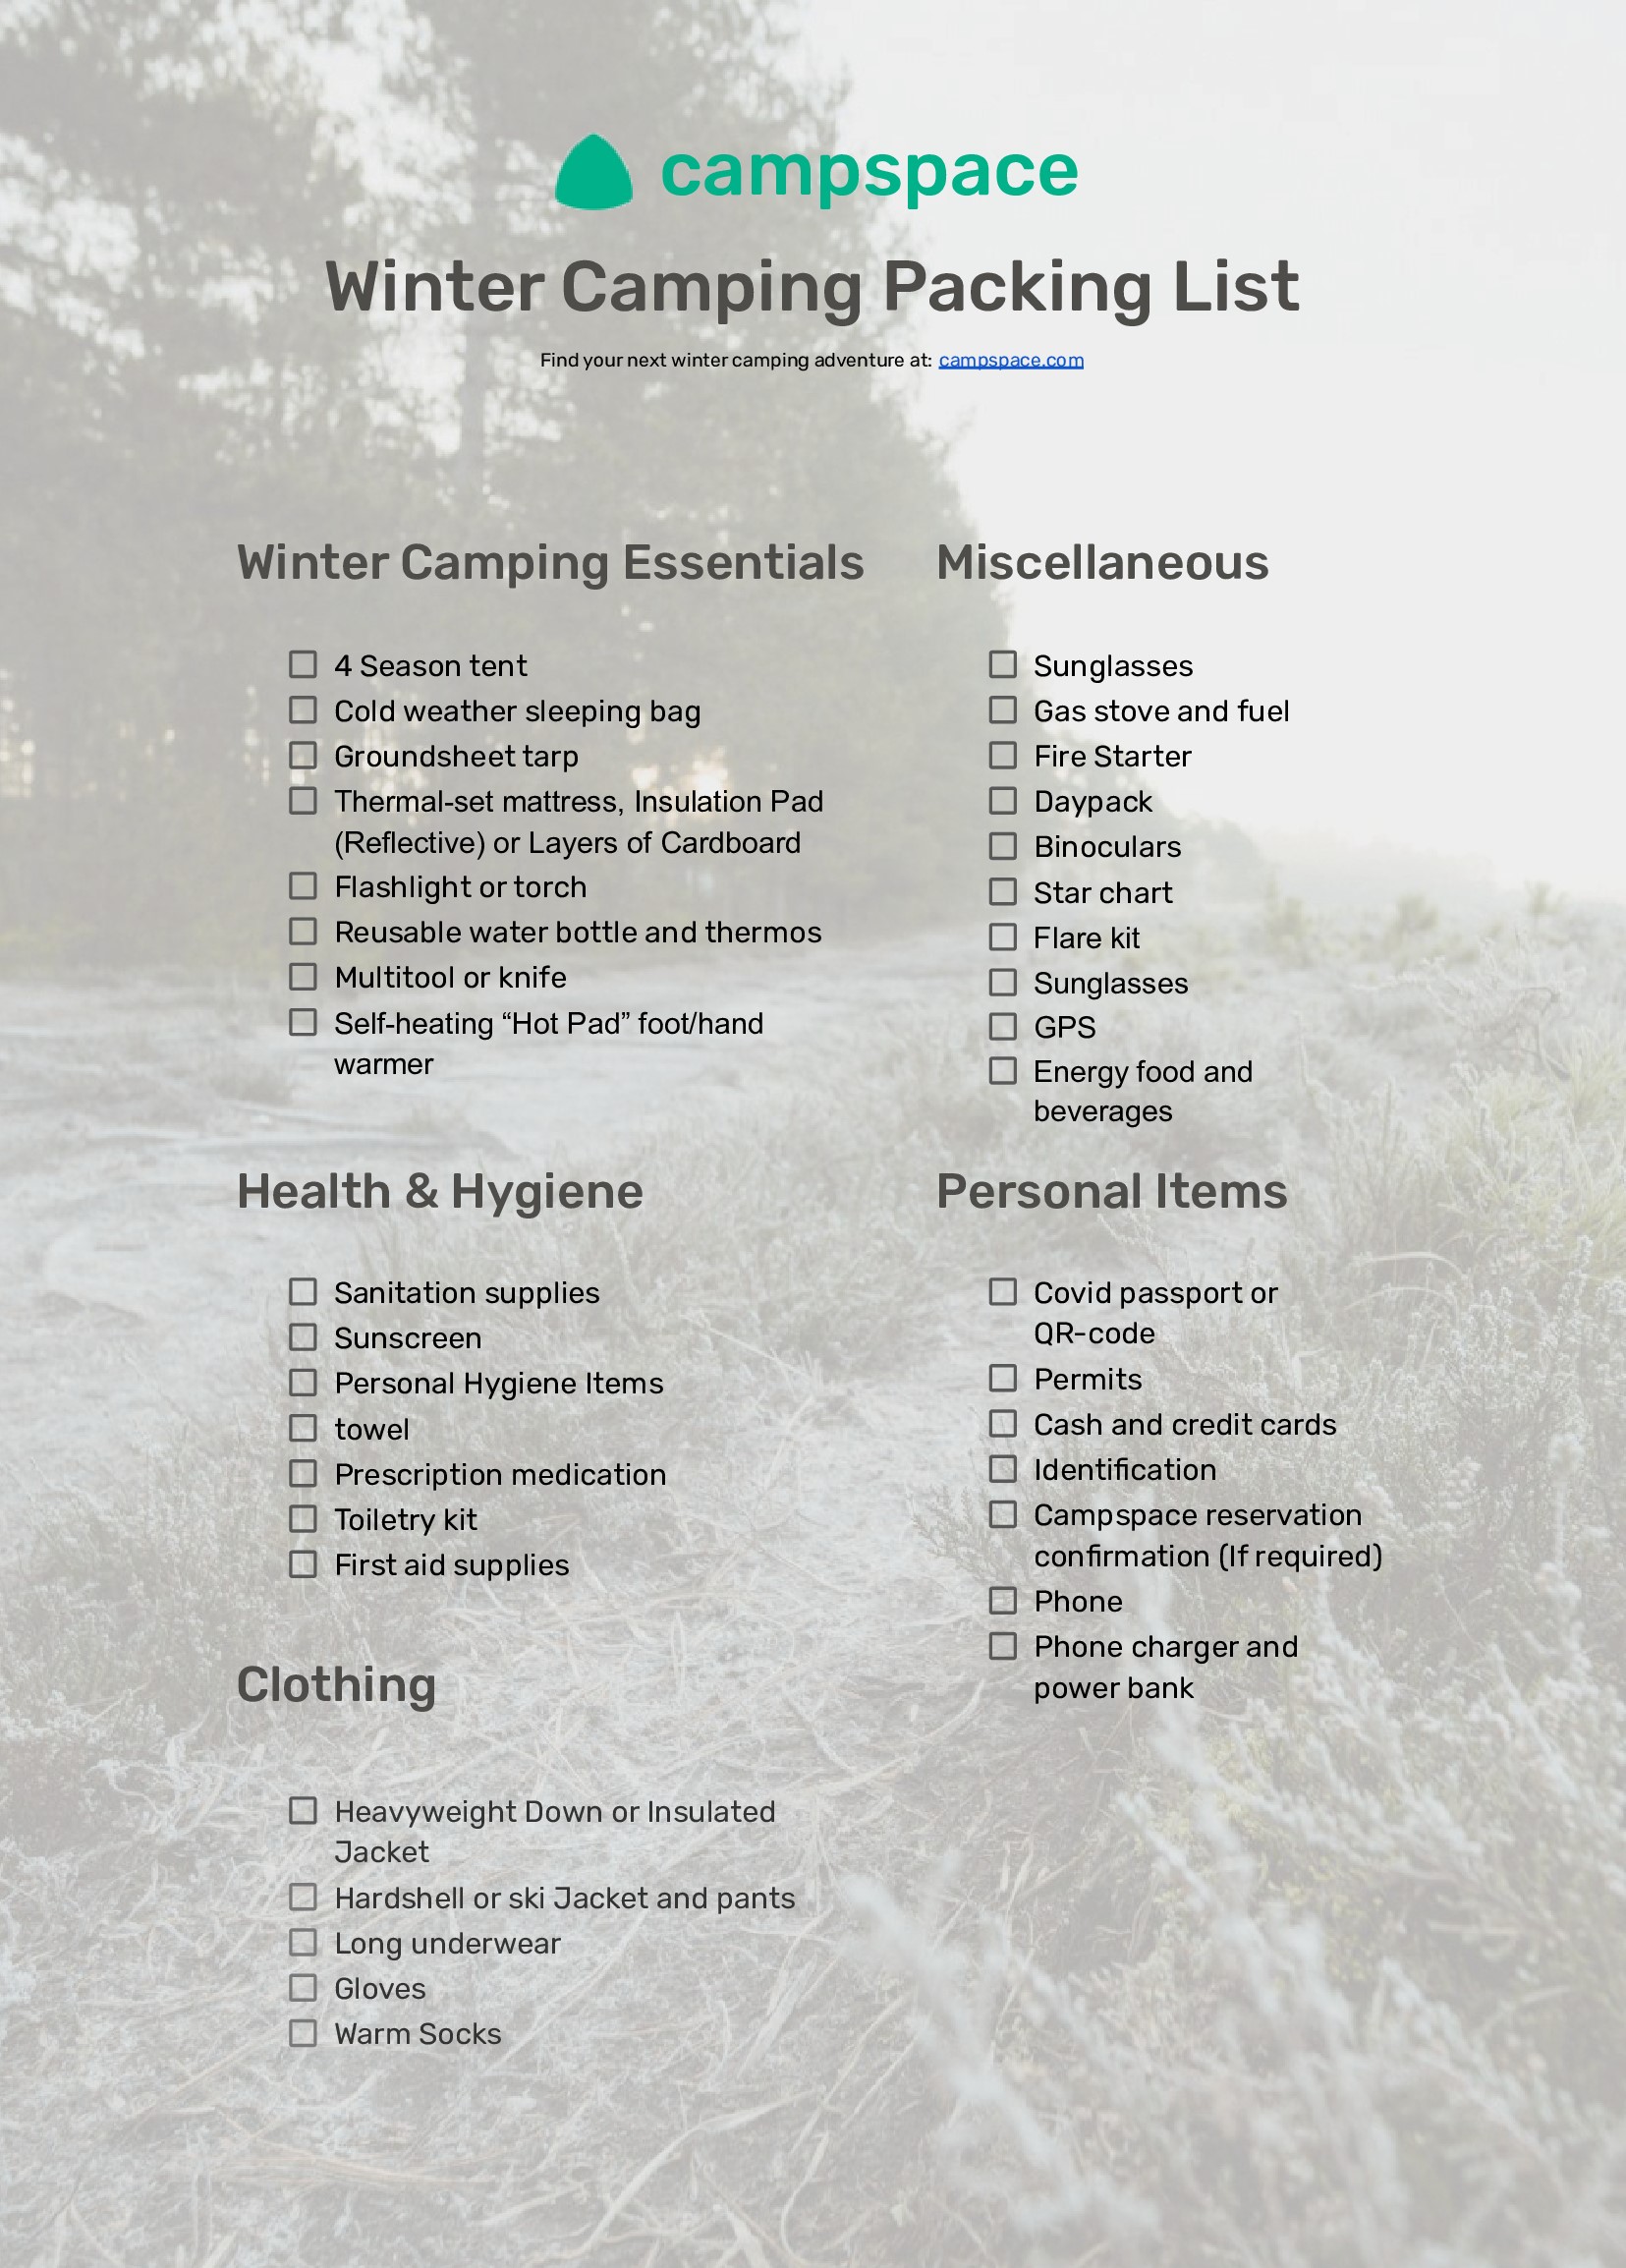 Packing list: How to prepare for your winter camping adventure